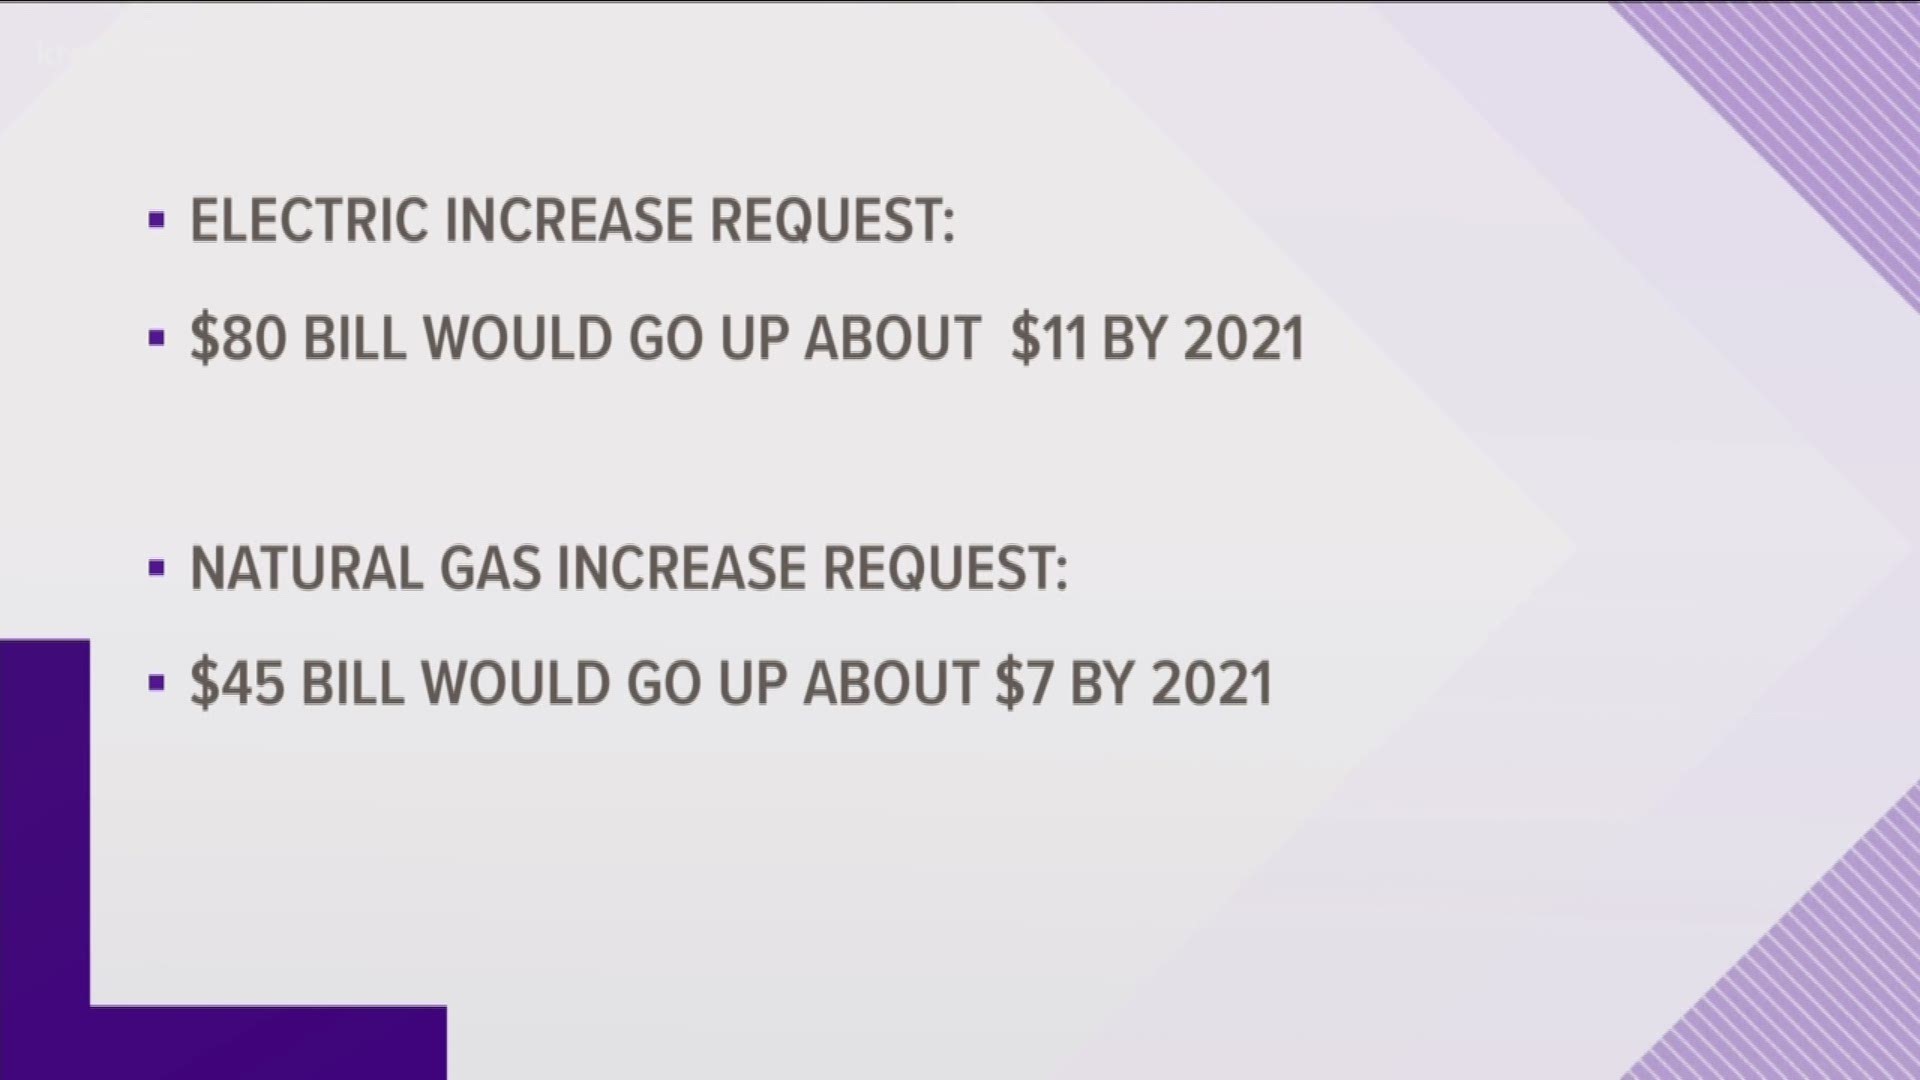 Avista wants to raise electric and natural gas rates for customers in 2020 and again in 2021.